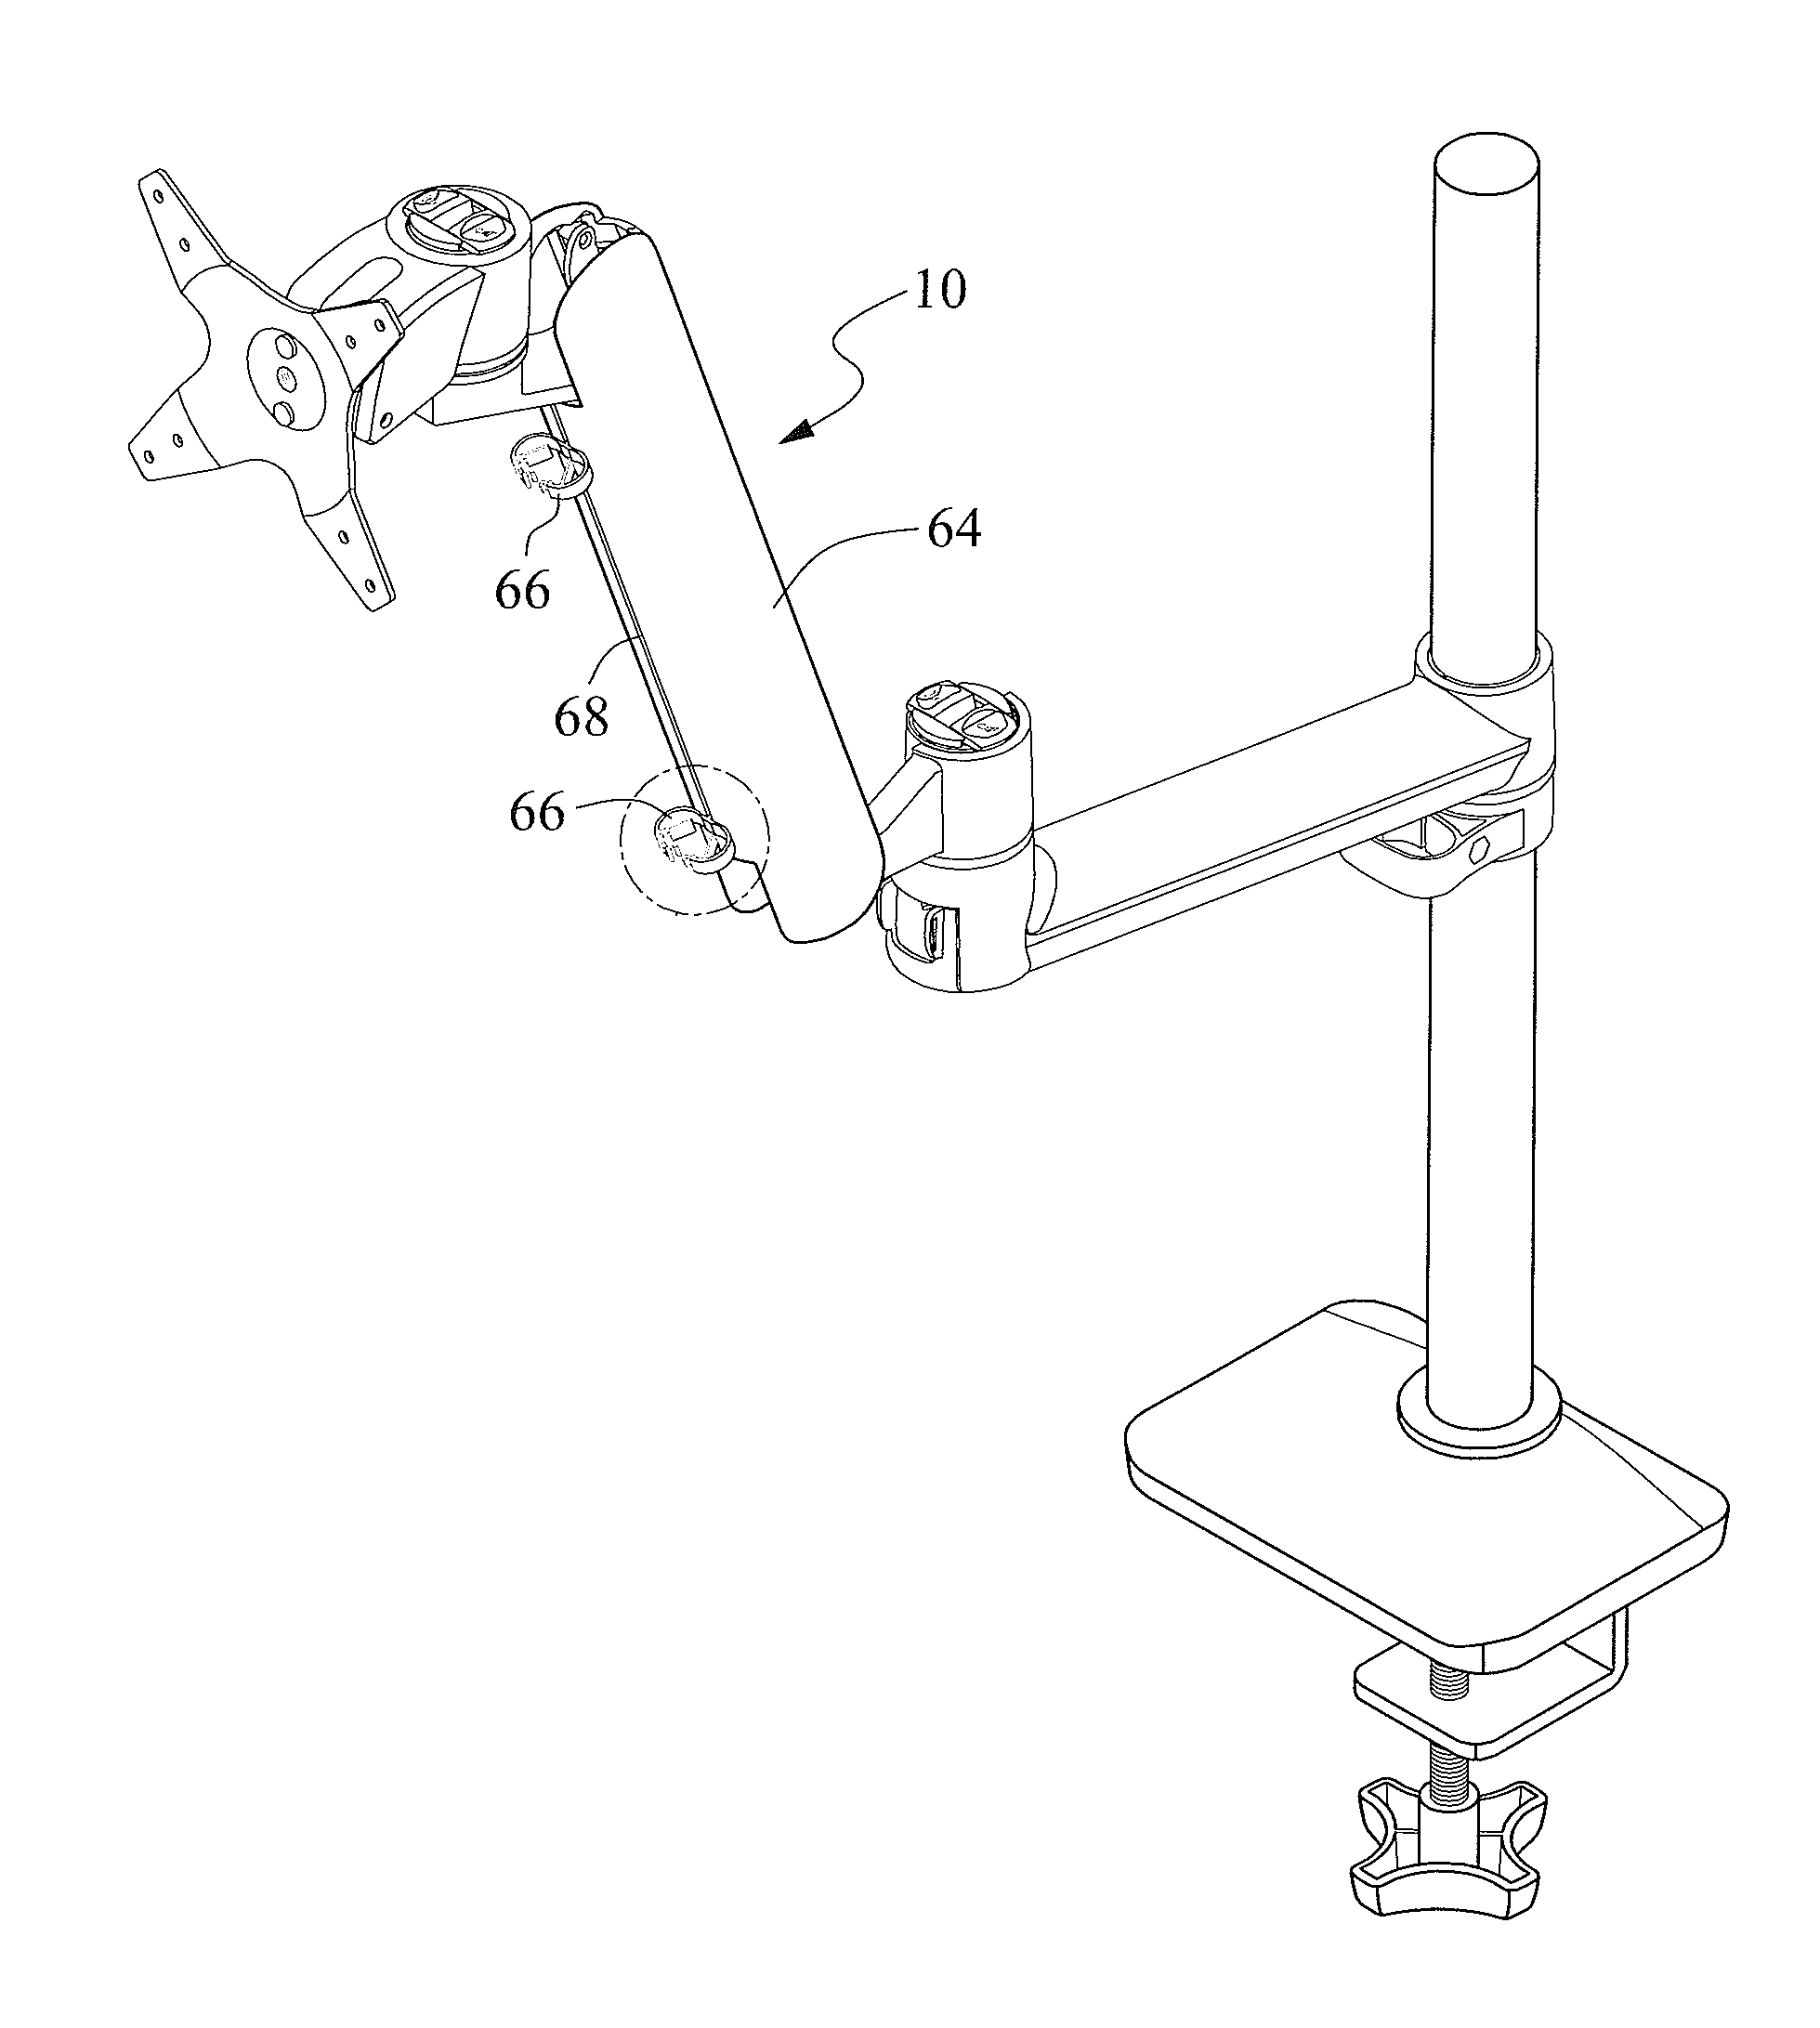 Load Supporting Apparatus